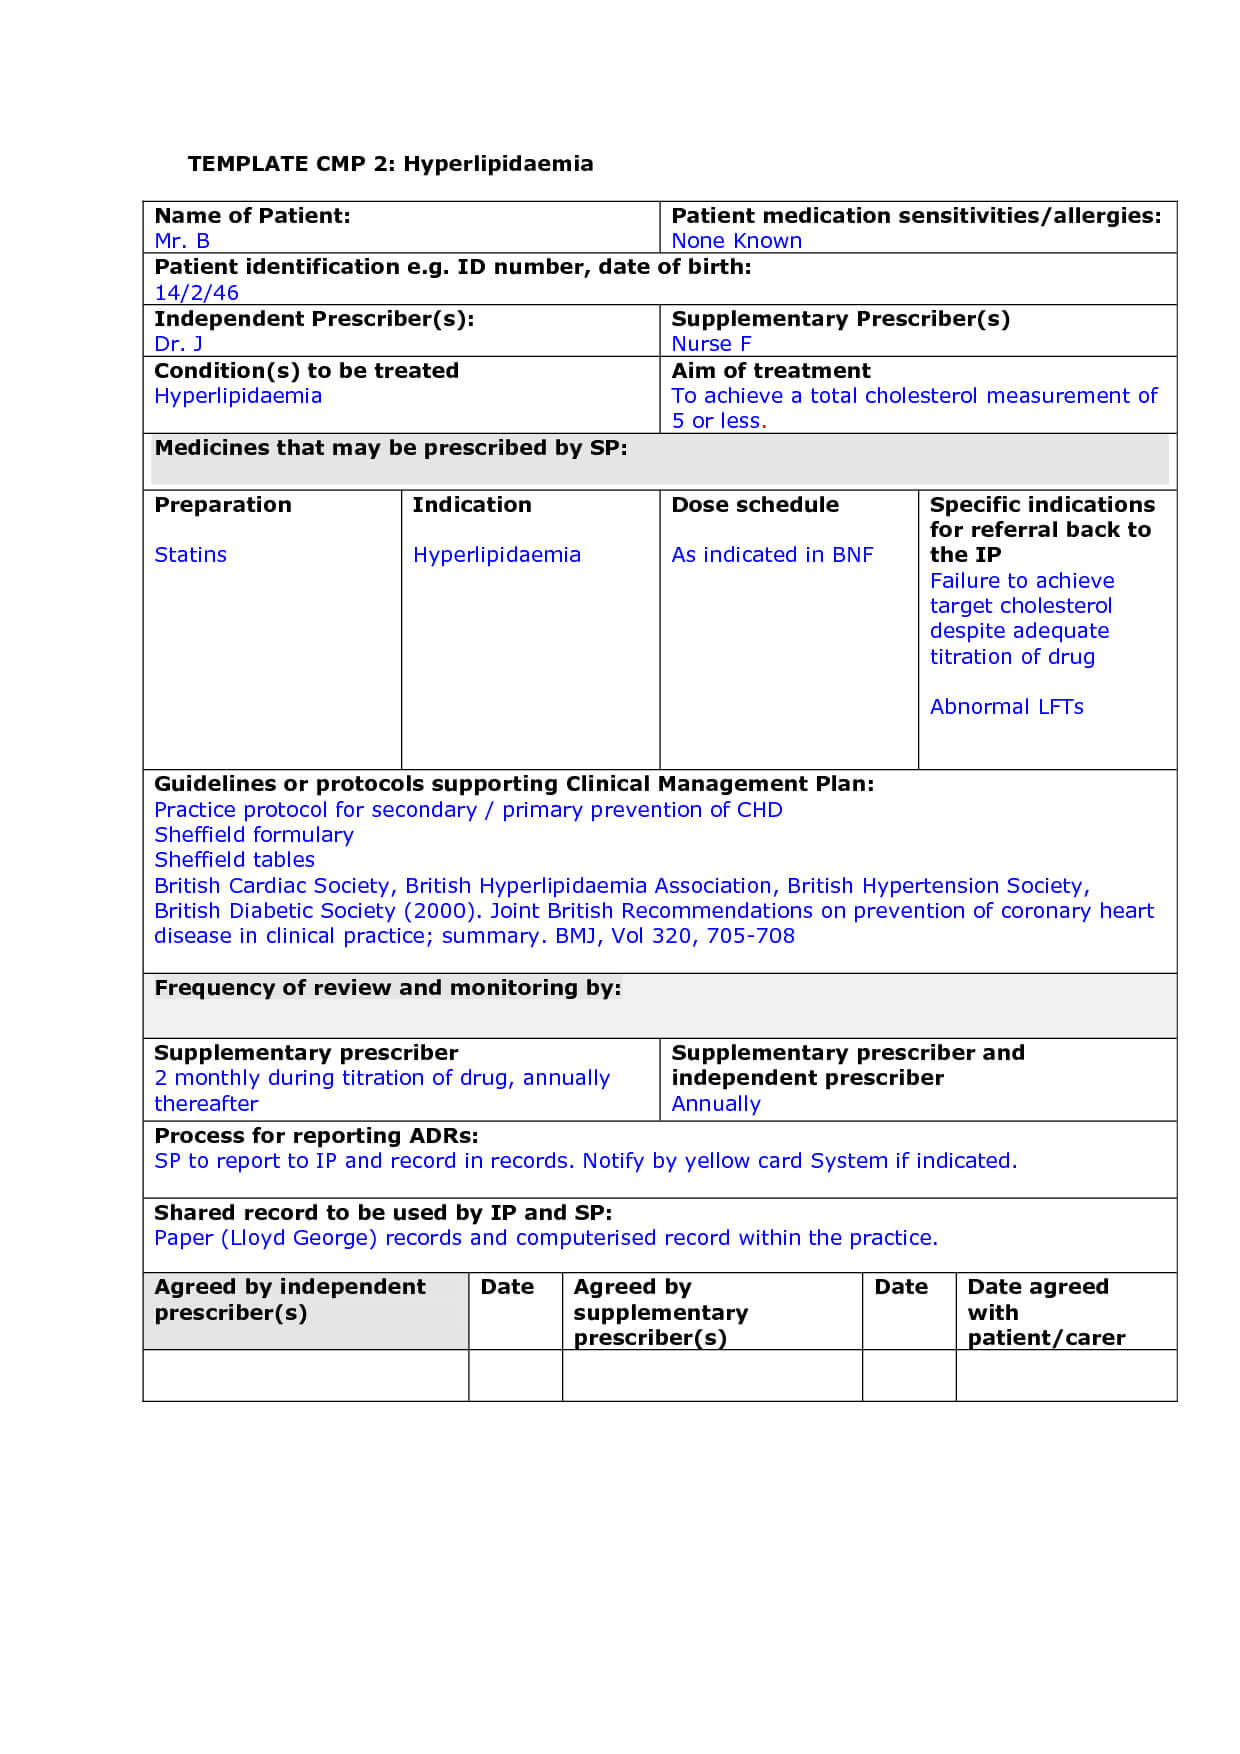 004 Nursing Drug Card Template Staggering Ideas School Throughout Pharmacology Drug Card Template